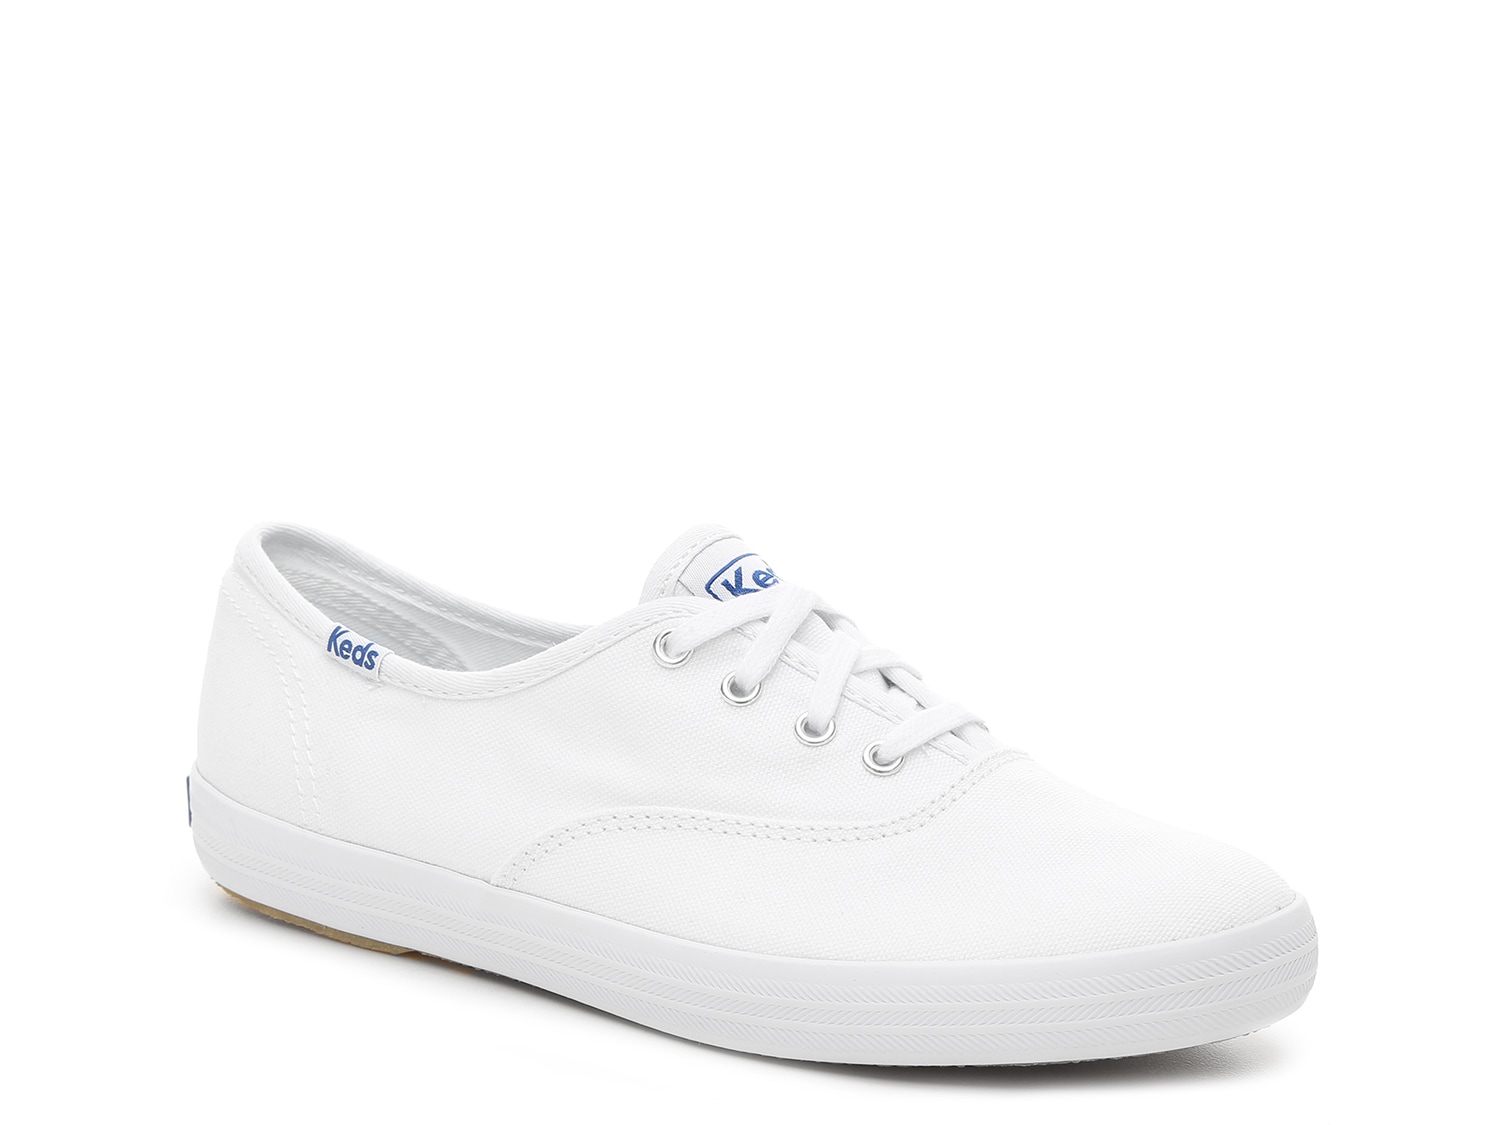 keds women's champion leather oxford